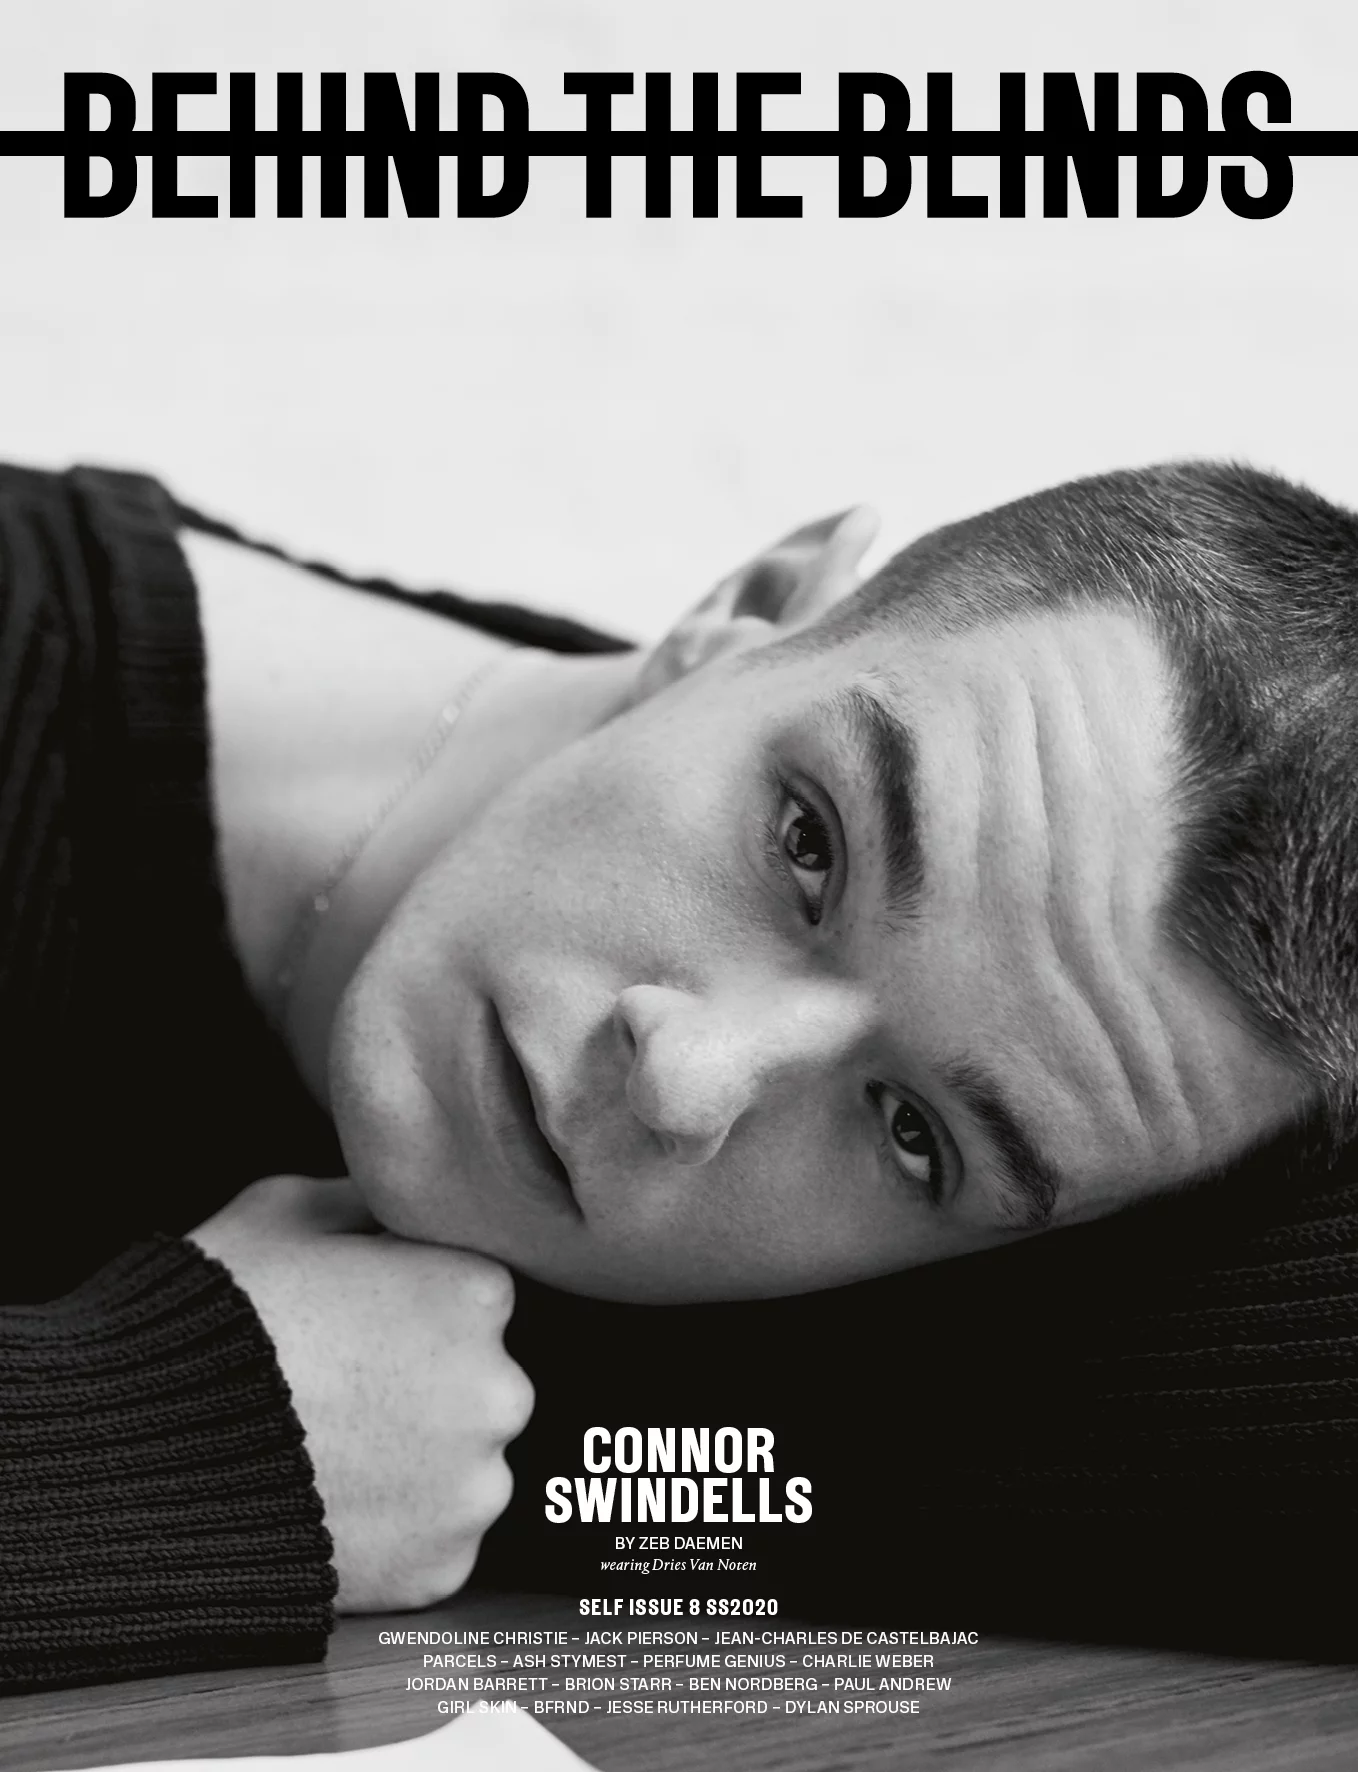 Connor Swindells for Behind the Blinds 2 by Paul Maximilian SCHLOSSER